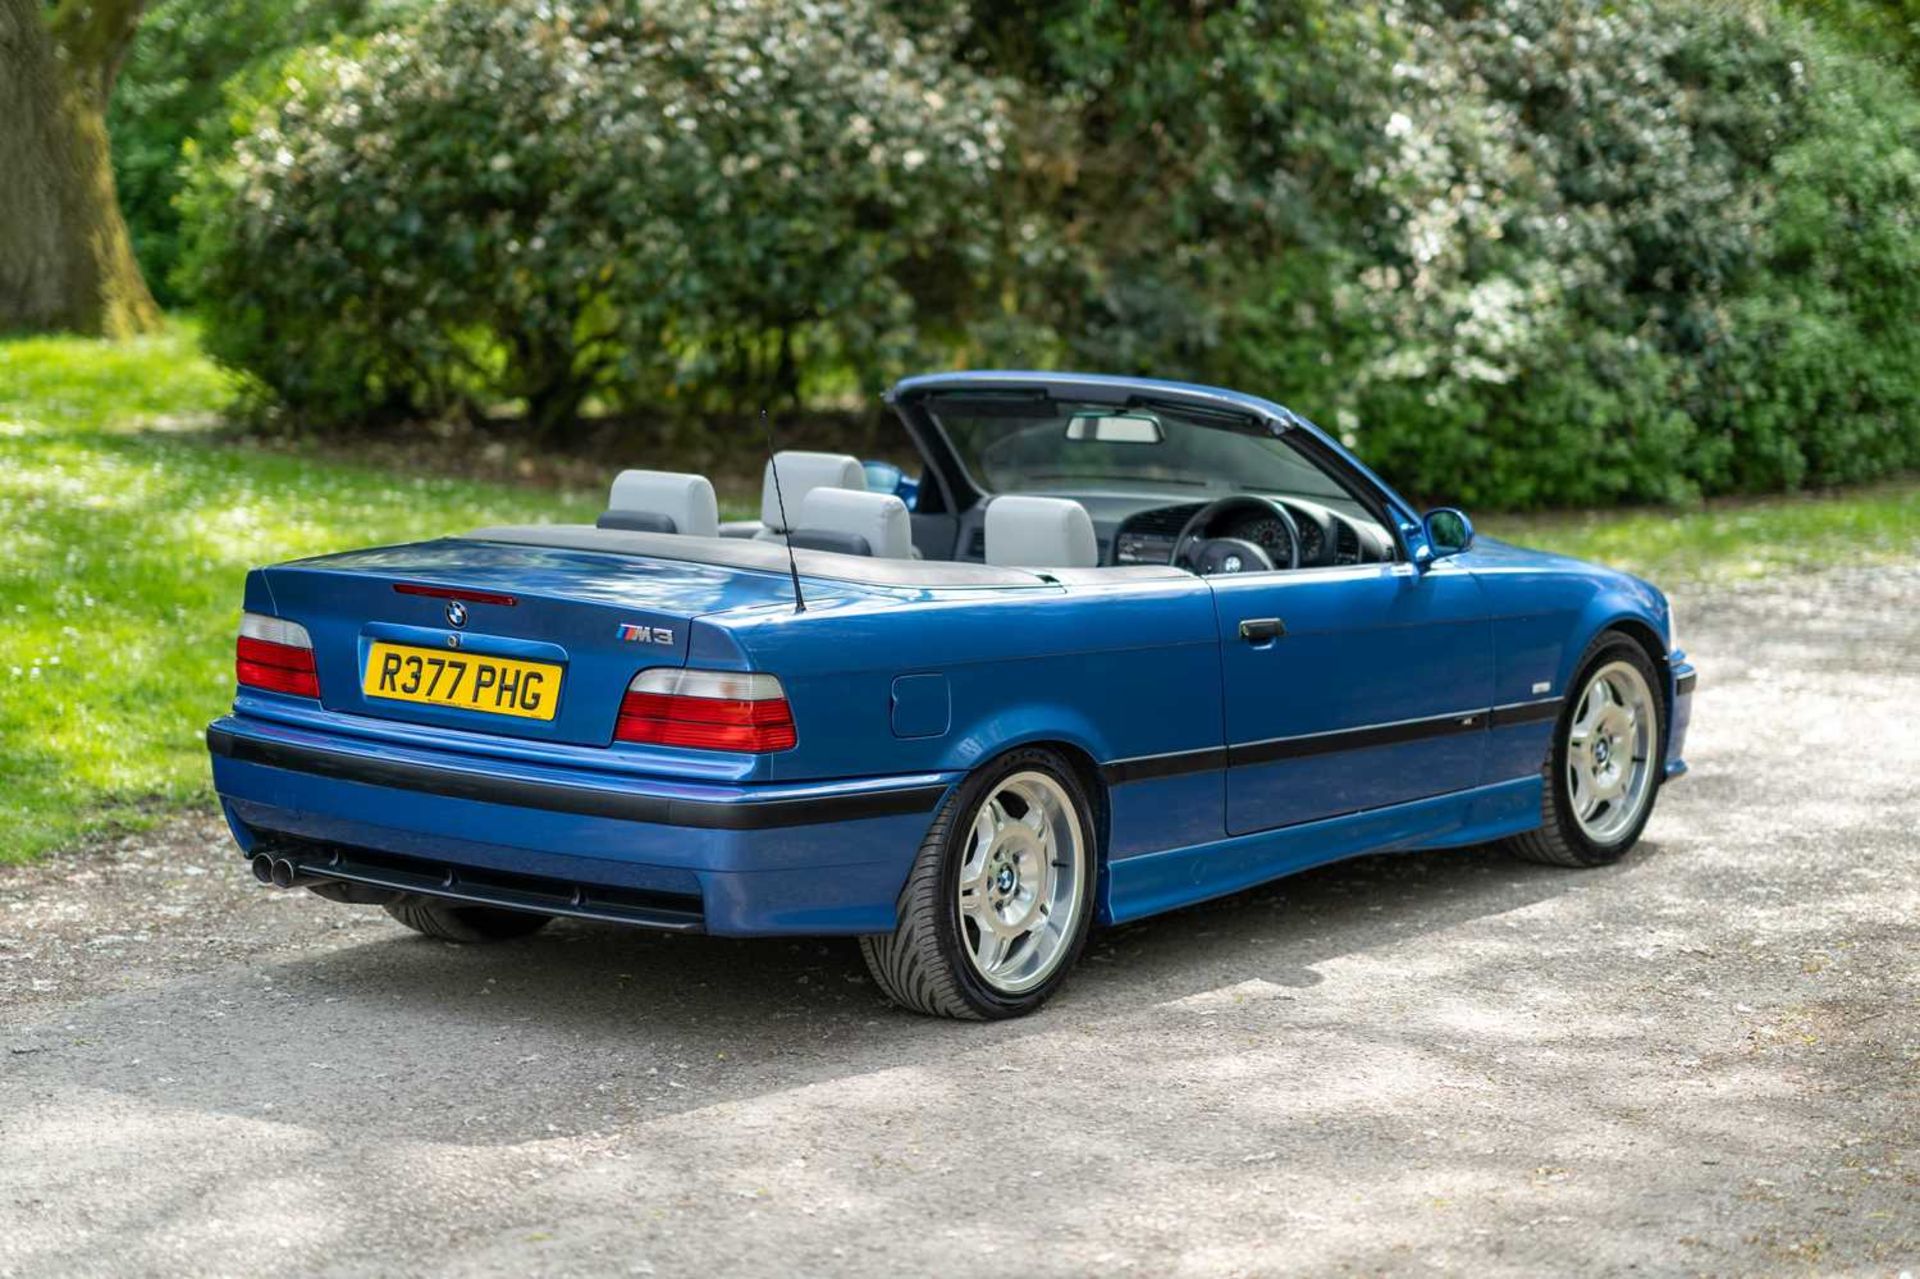 1998 BMW M3 Evolution Convertible Only 54,000 miles and full service history - Image 77 of 89